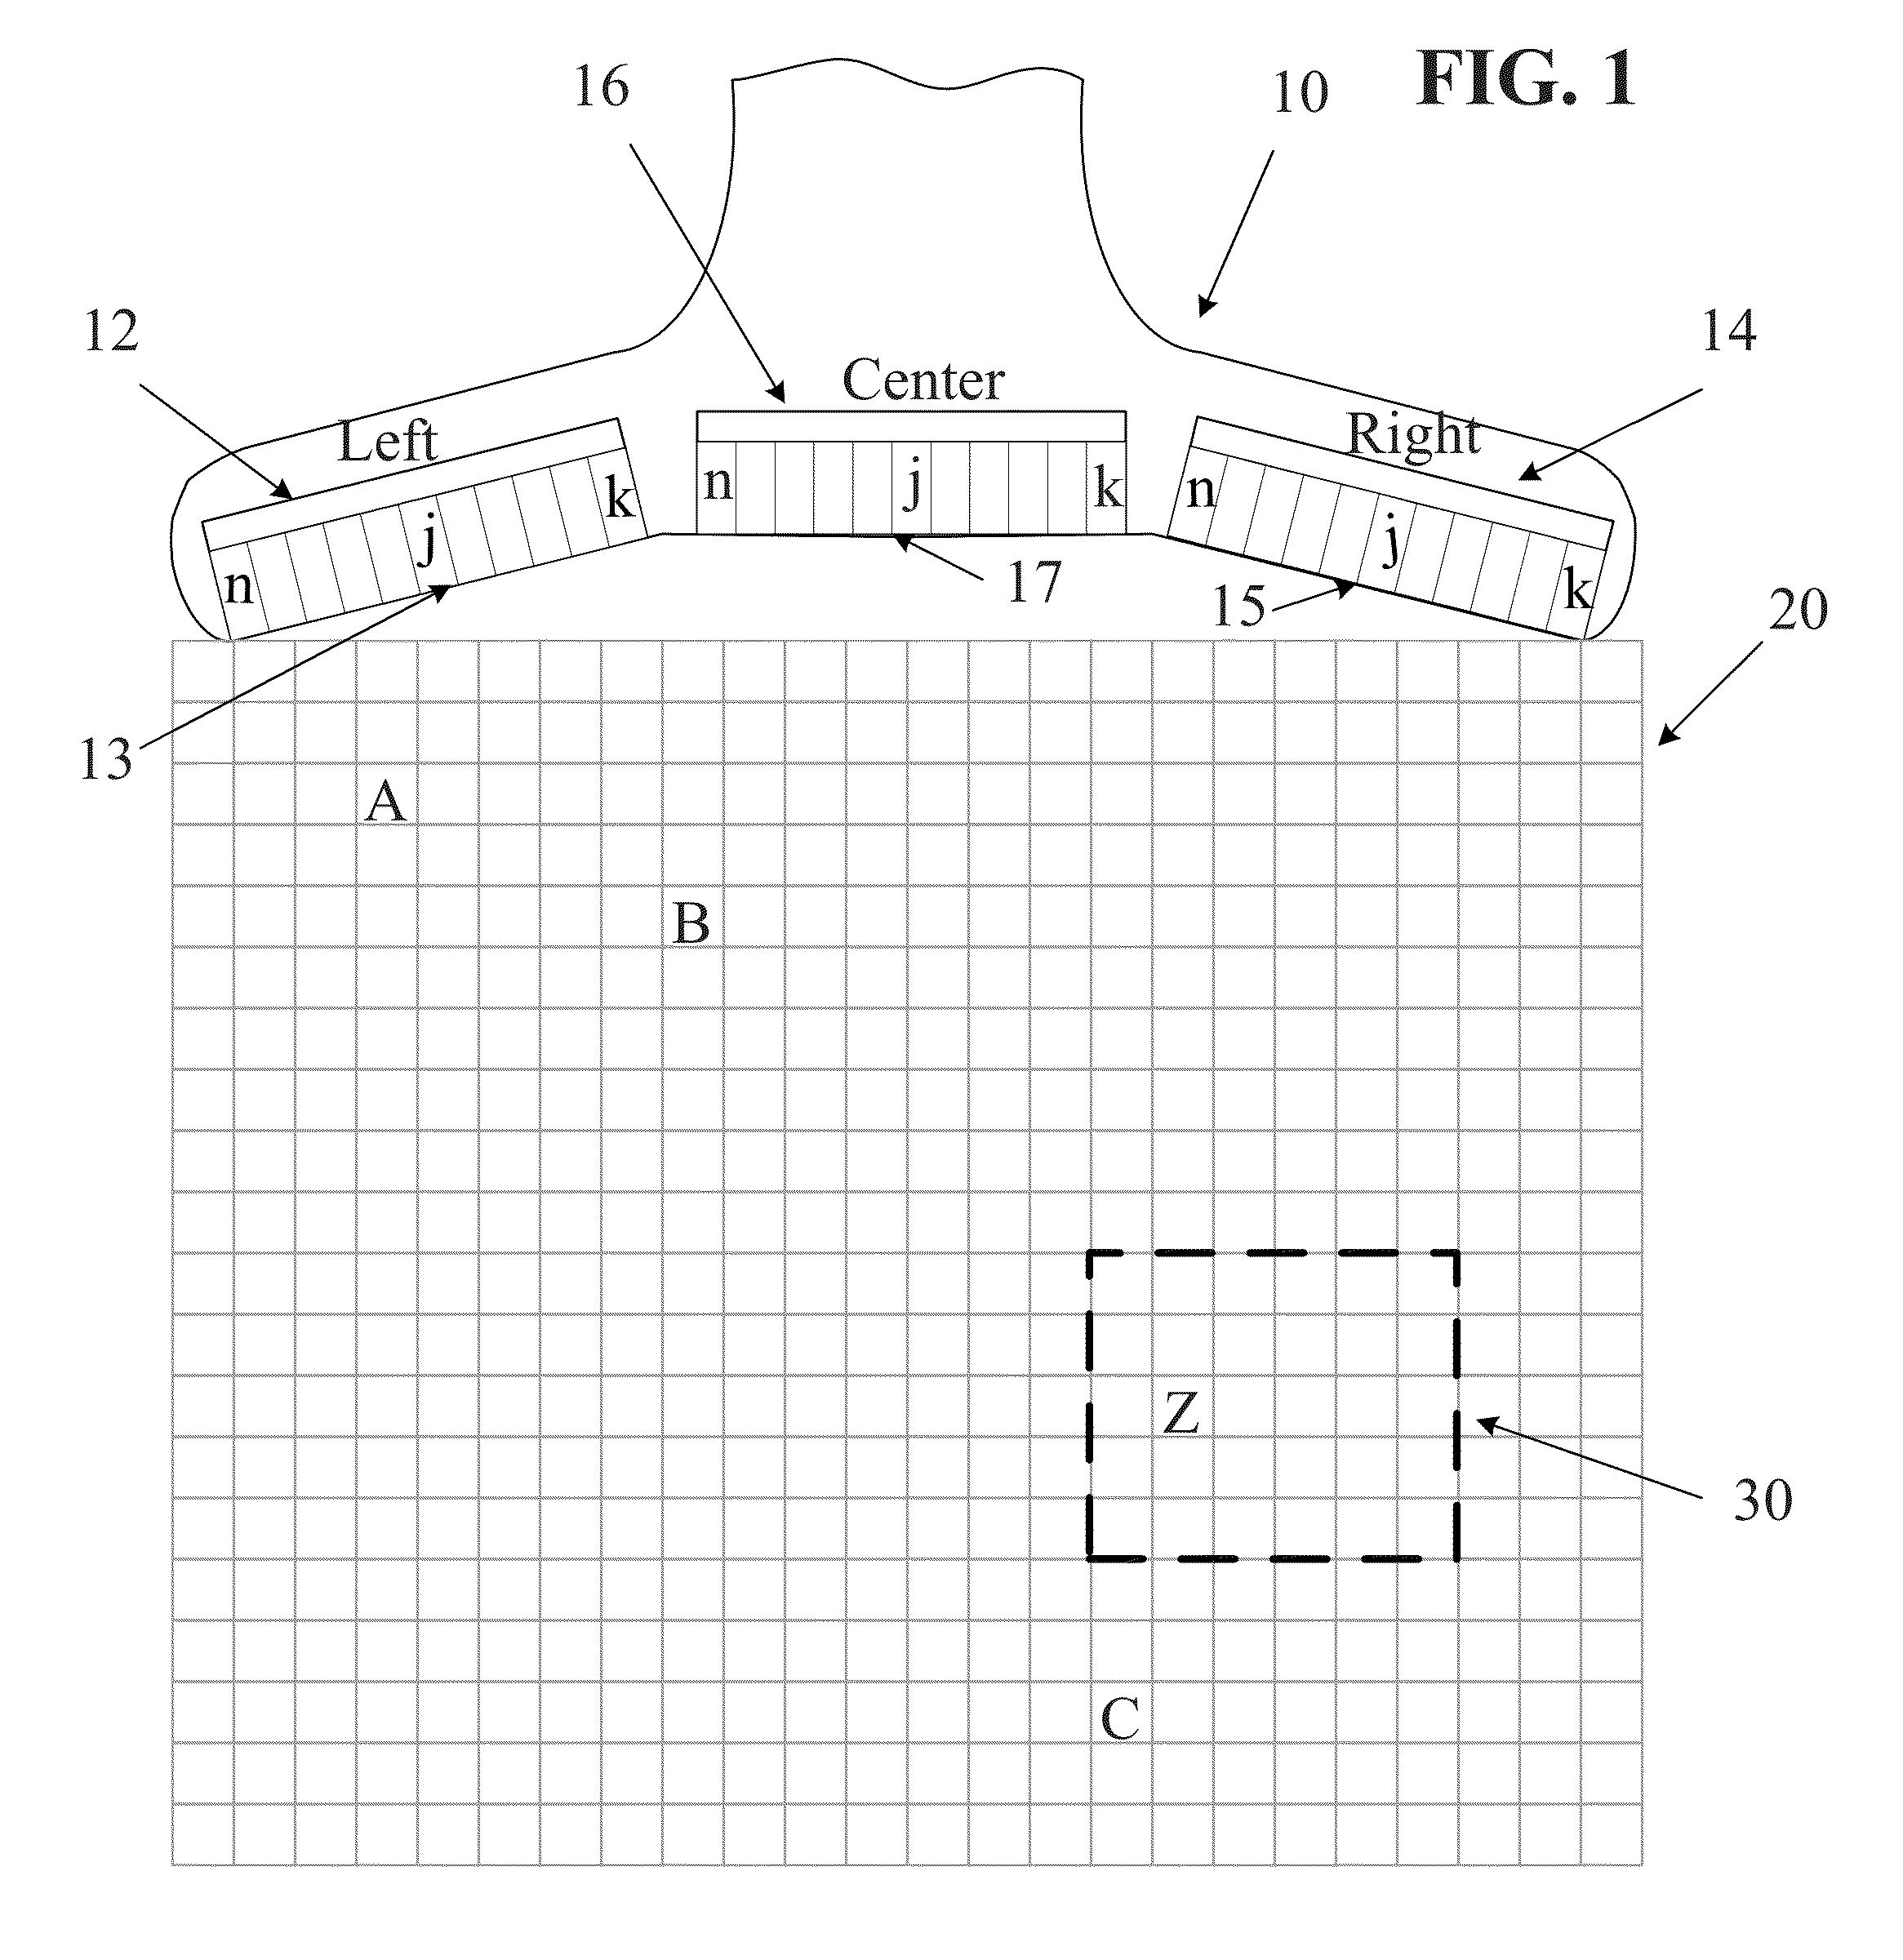 Ultrasound Imaging System Memory Architecture